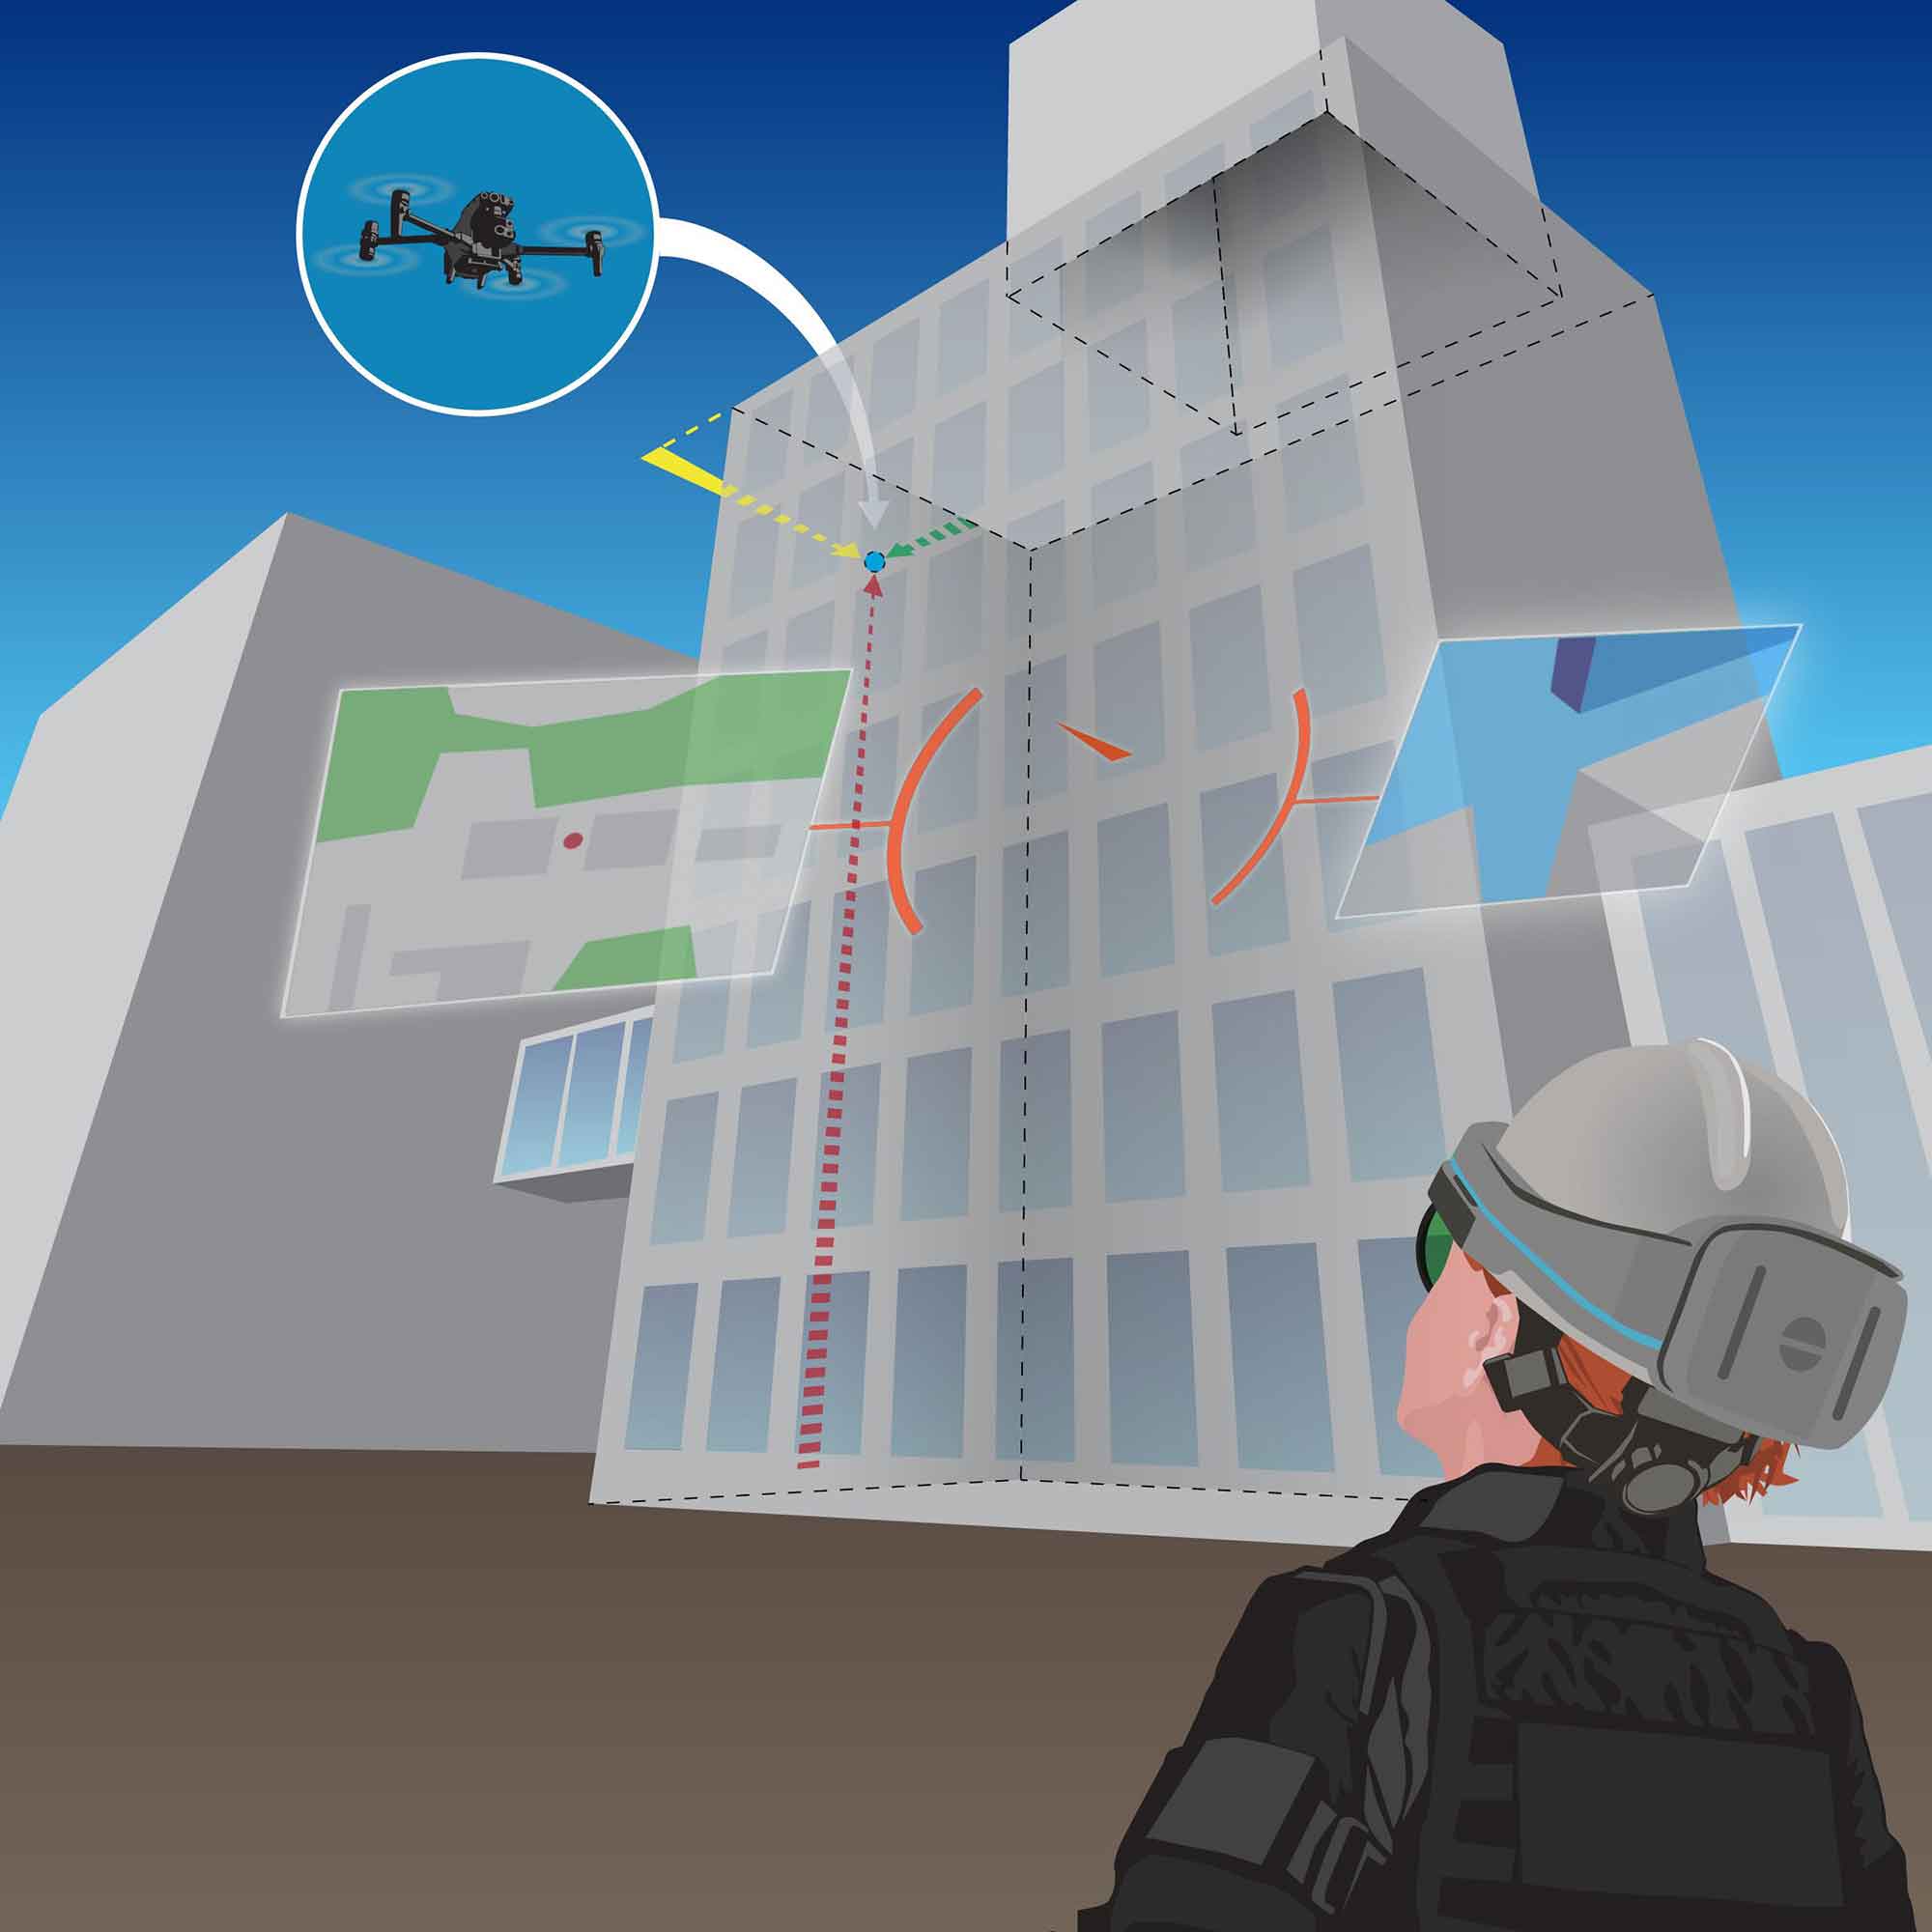 Beyond-visual line of sight (BVLOS) drone systems are the key to safe Situational Awareness